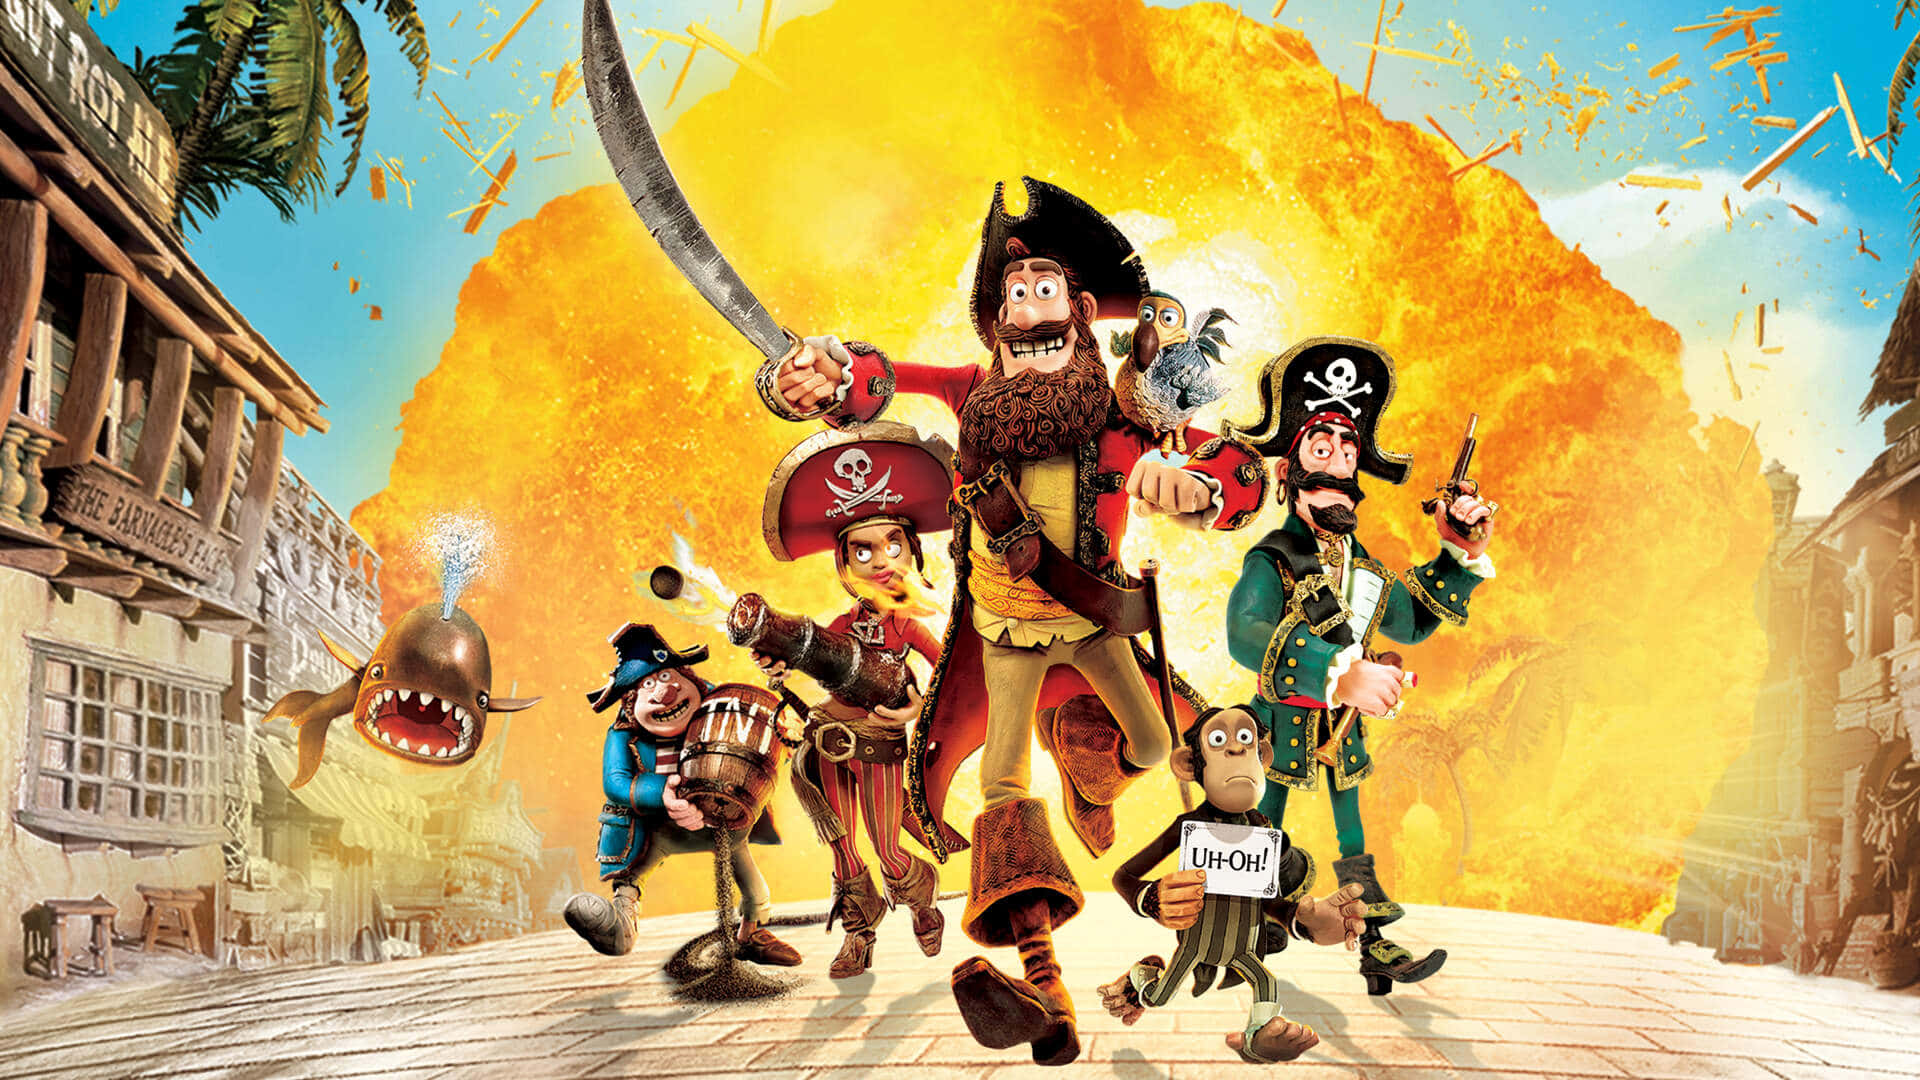 Poster Of The Pirates Band Of Misfits Wallpaper